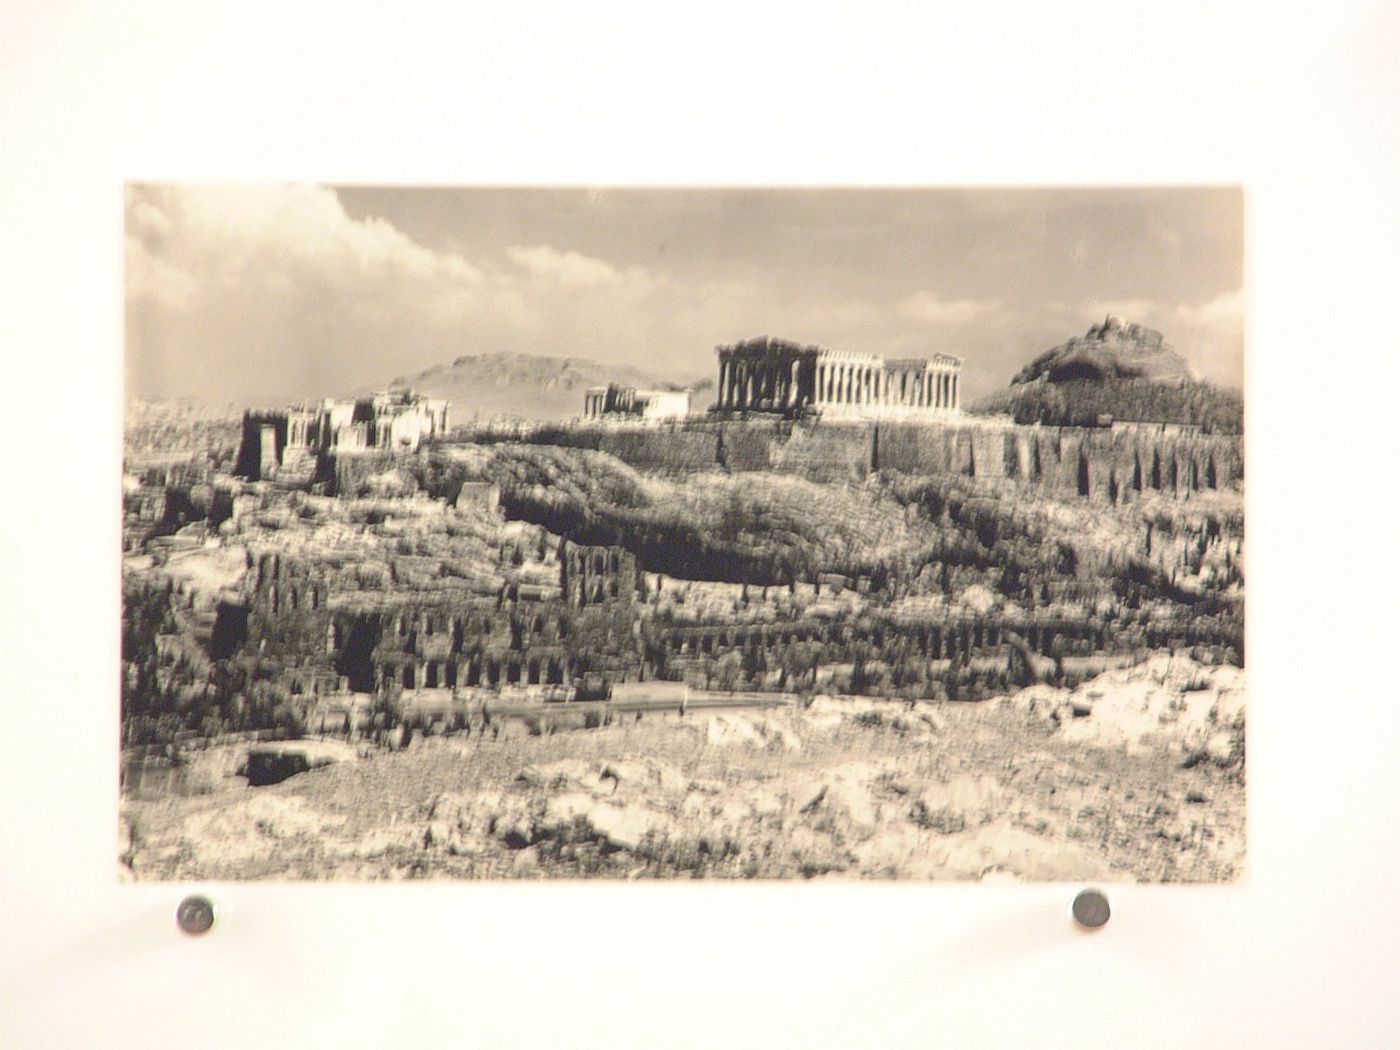 Acropolis from the southwest, Athens, Greece